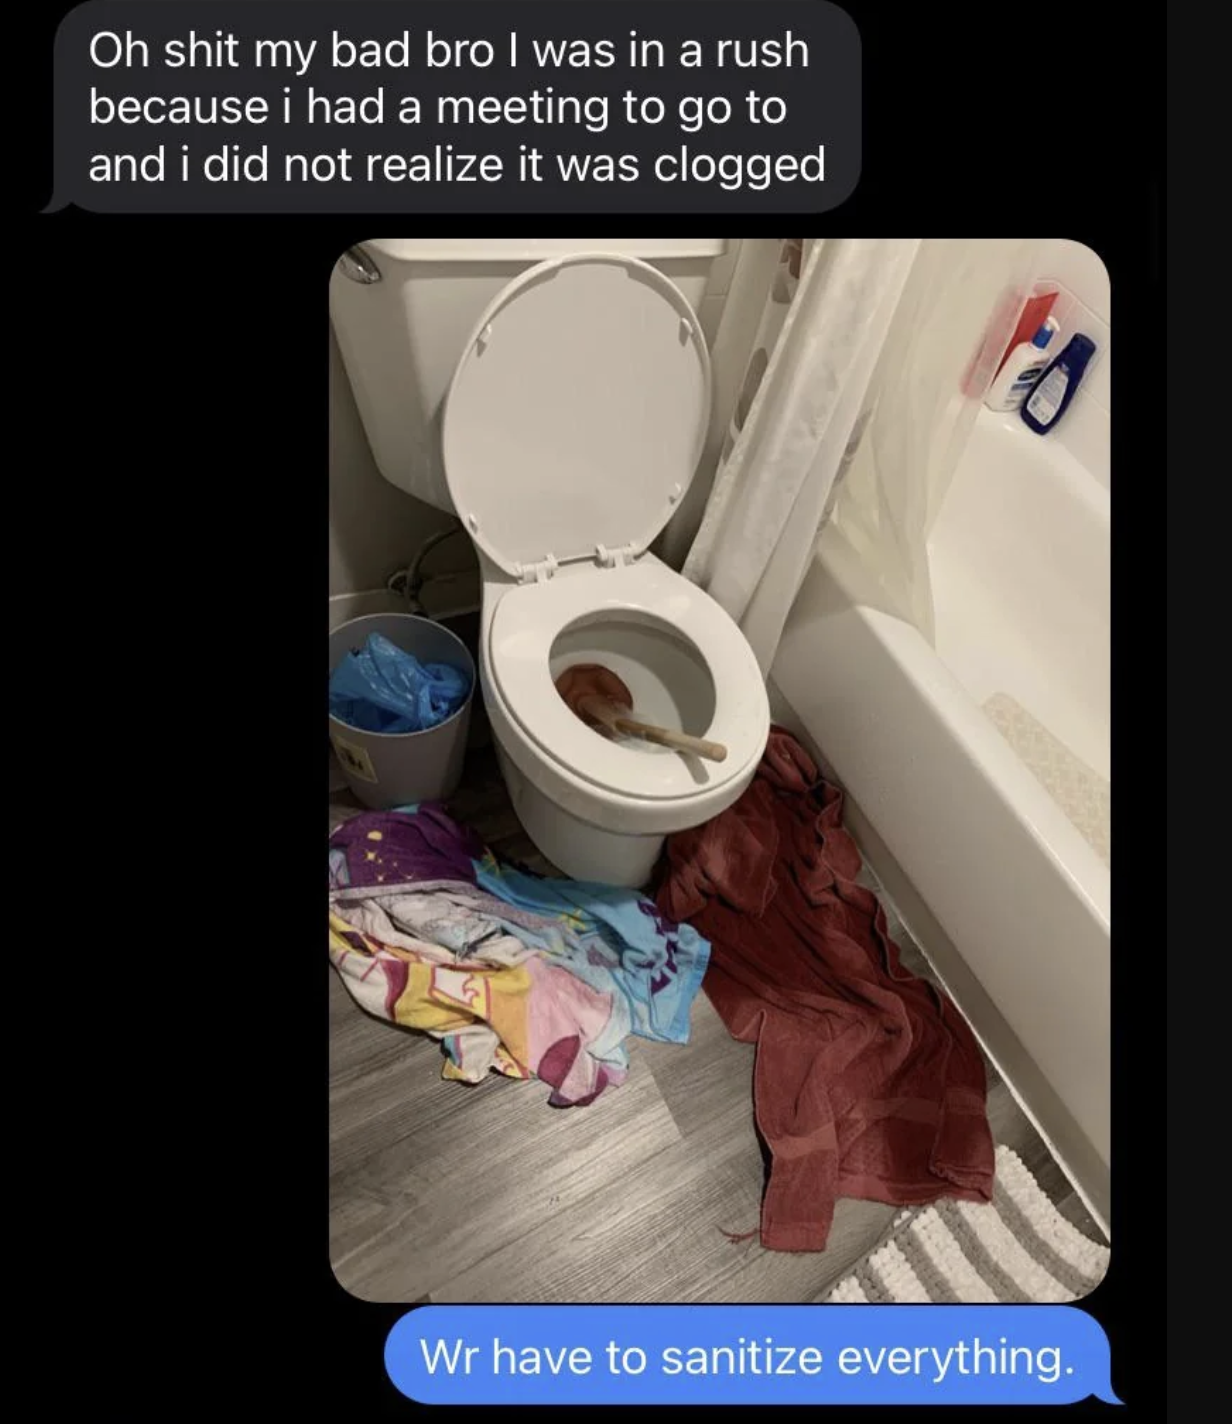 Imessage conversation that reads: &quot;Oh shit my bad bro I was in a rush because I had a meeting to go to and I did not realize it was clogged&quot; the message reply reads: &quot;We have to sanitize everything&quot; and includes an image of a toilet with a plunger in it